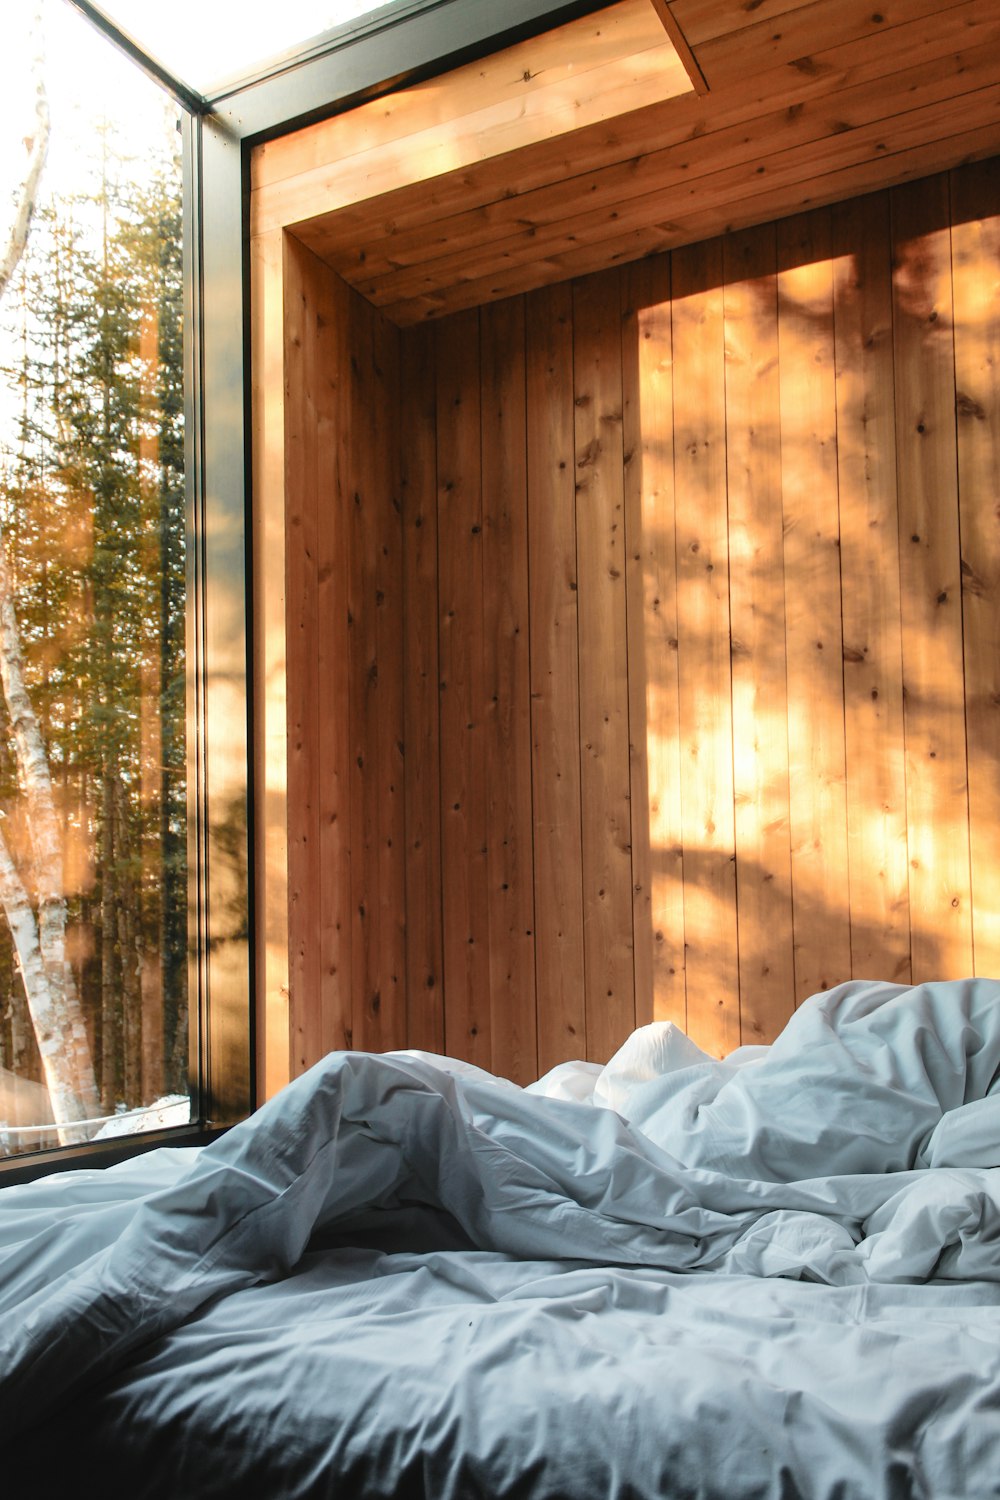 a bed in a room with a wooden wall